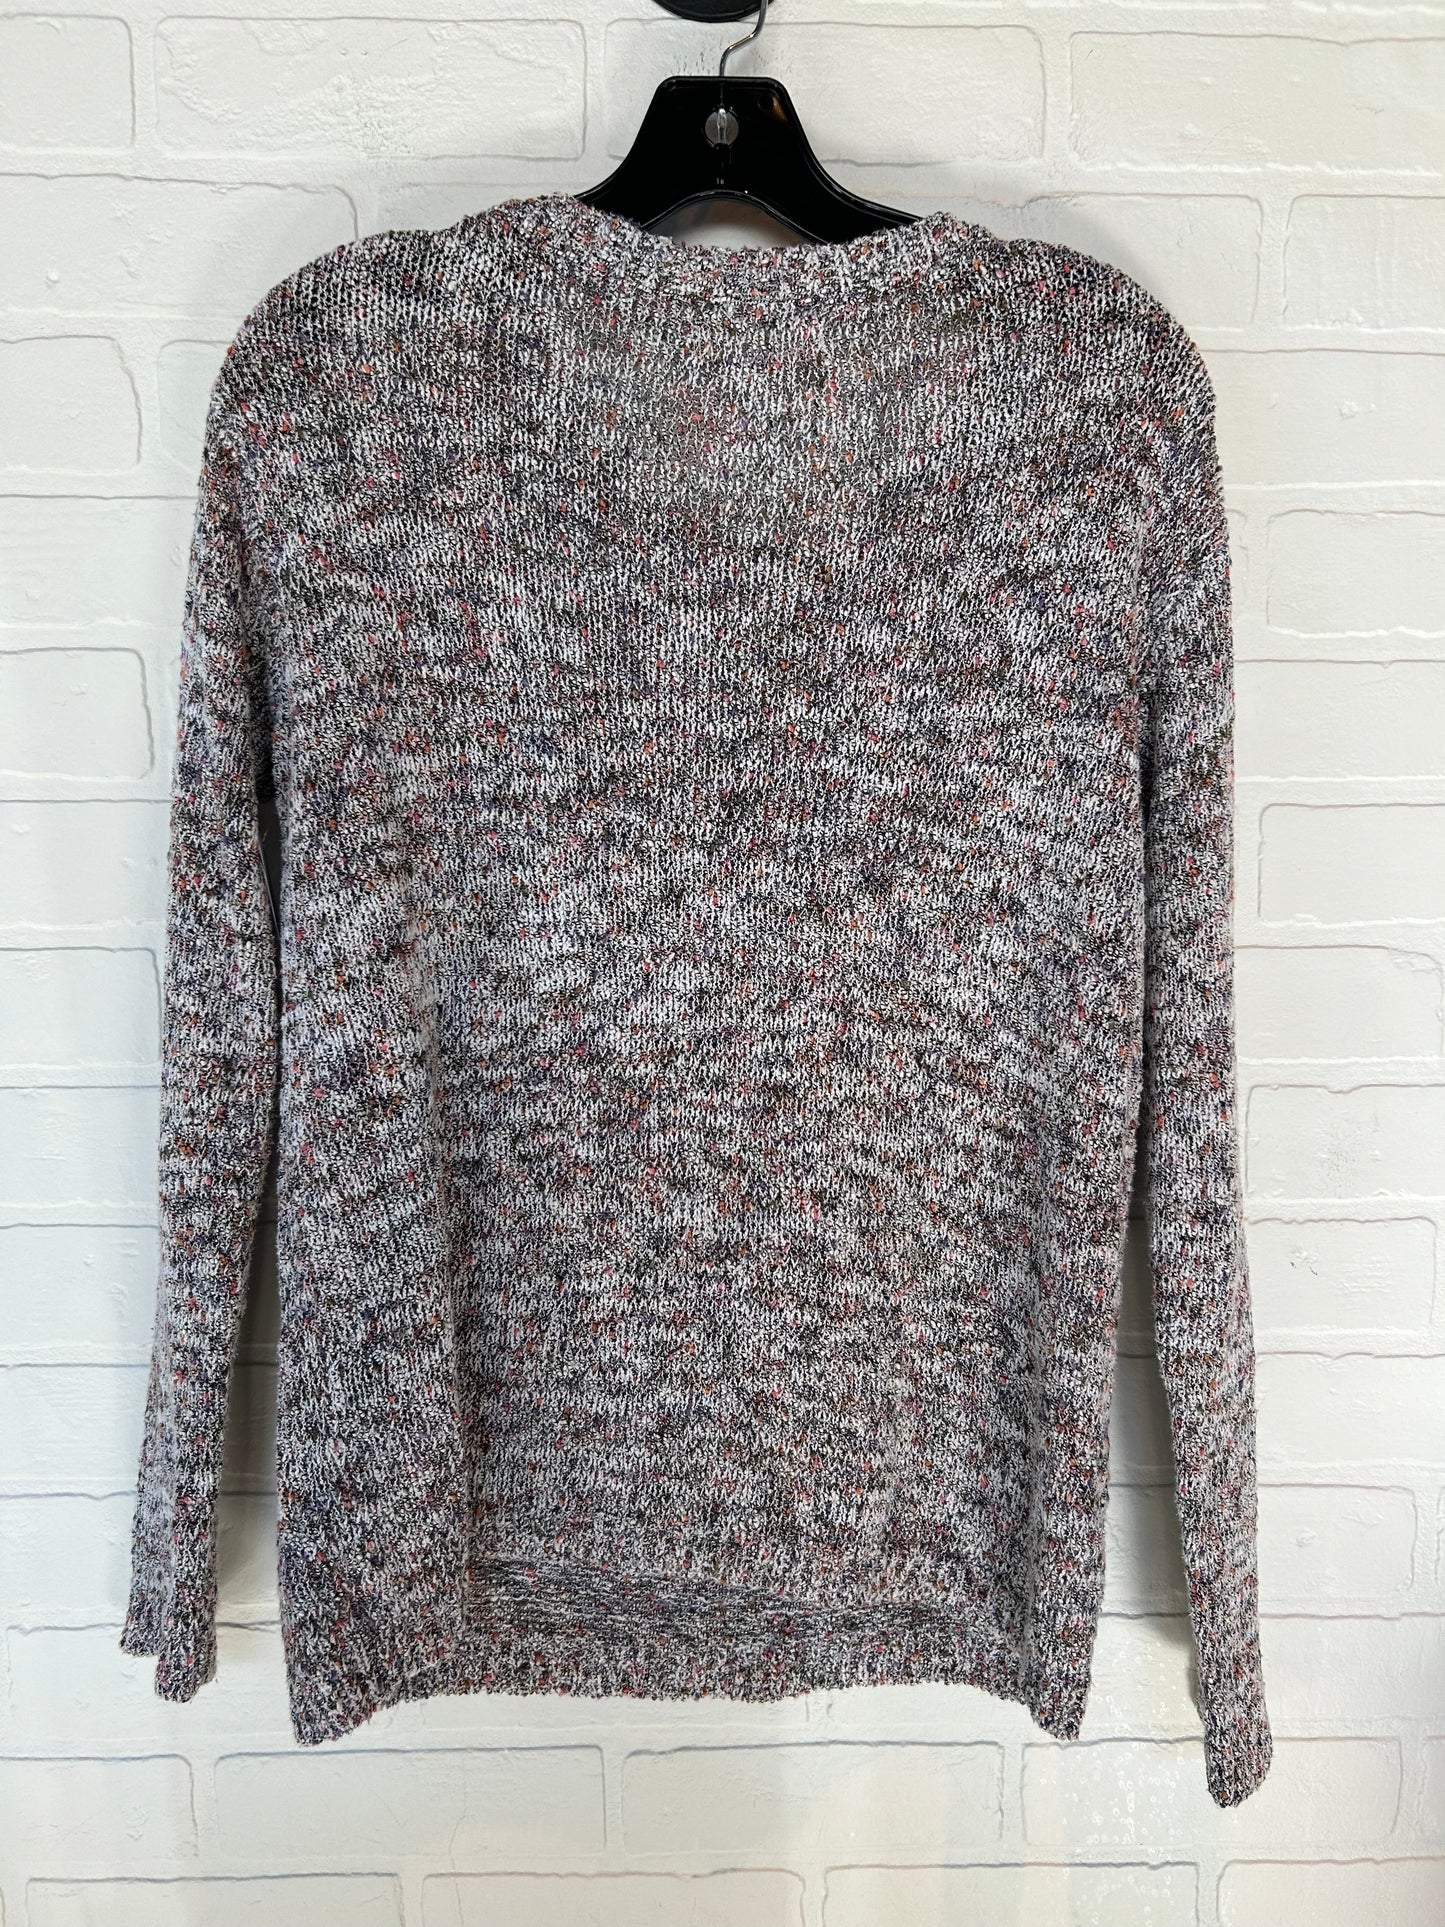 Multi-colored Sweater Lou And Grey, Size Xs